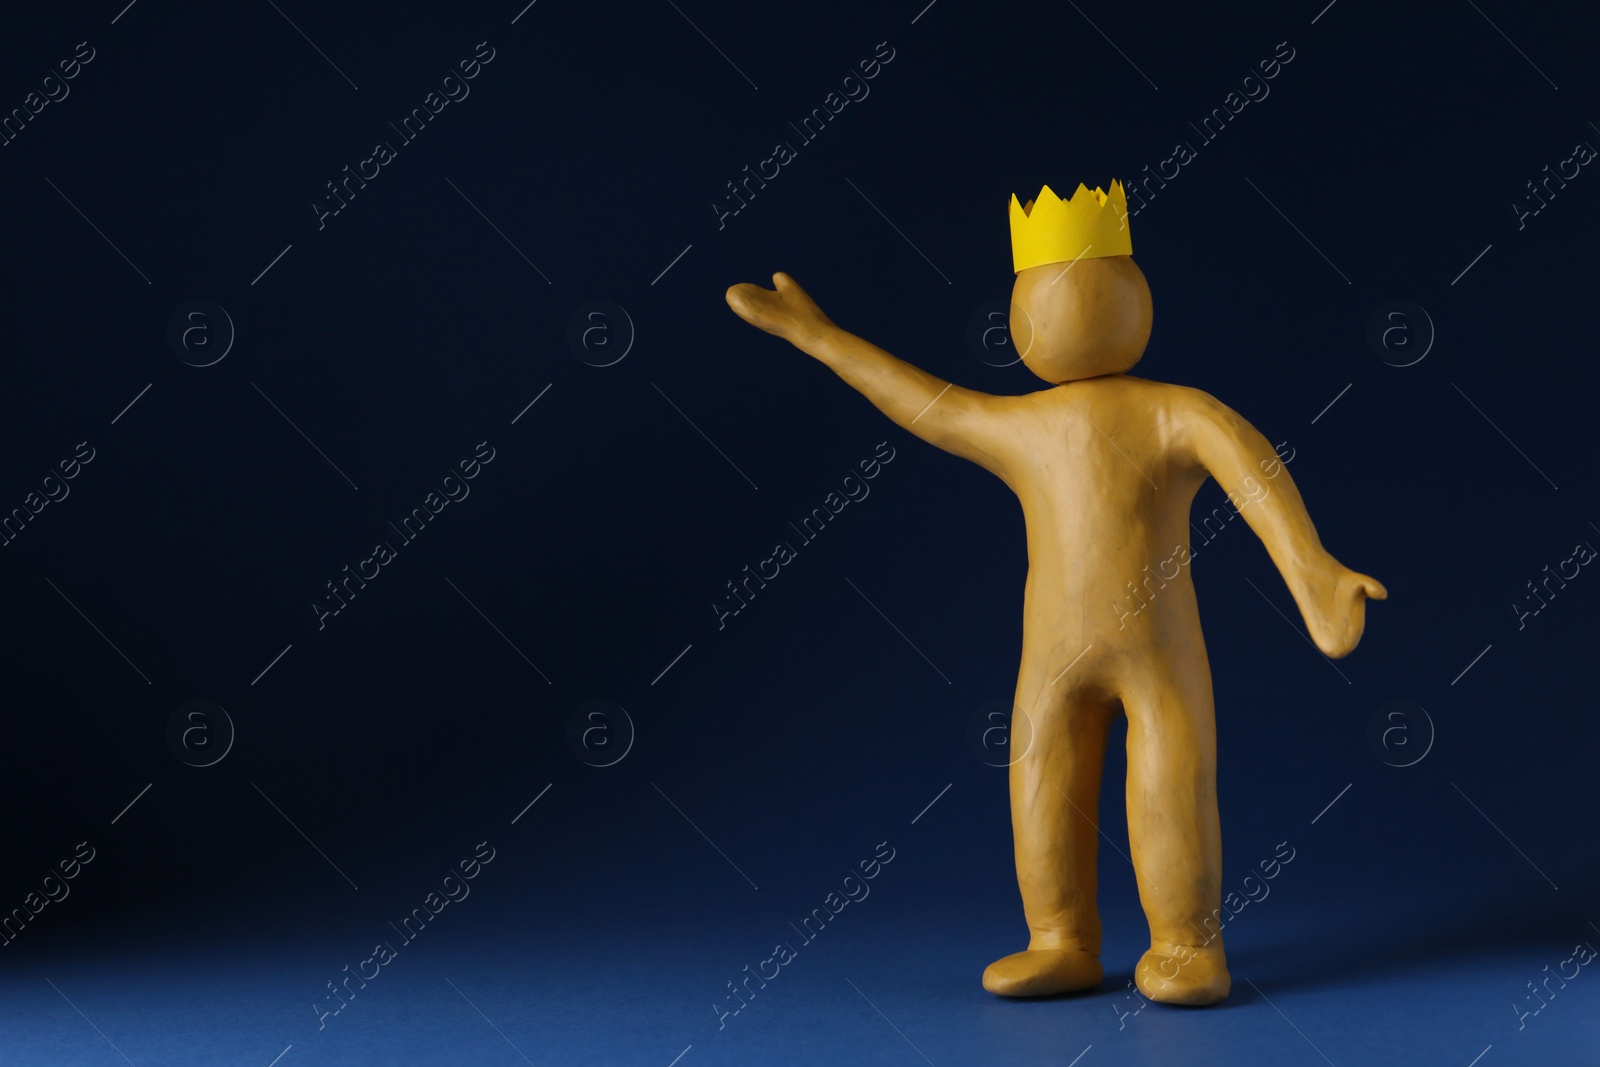 Photo of Plasticine figure with crown on head against dark blue background. Space for text